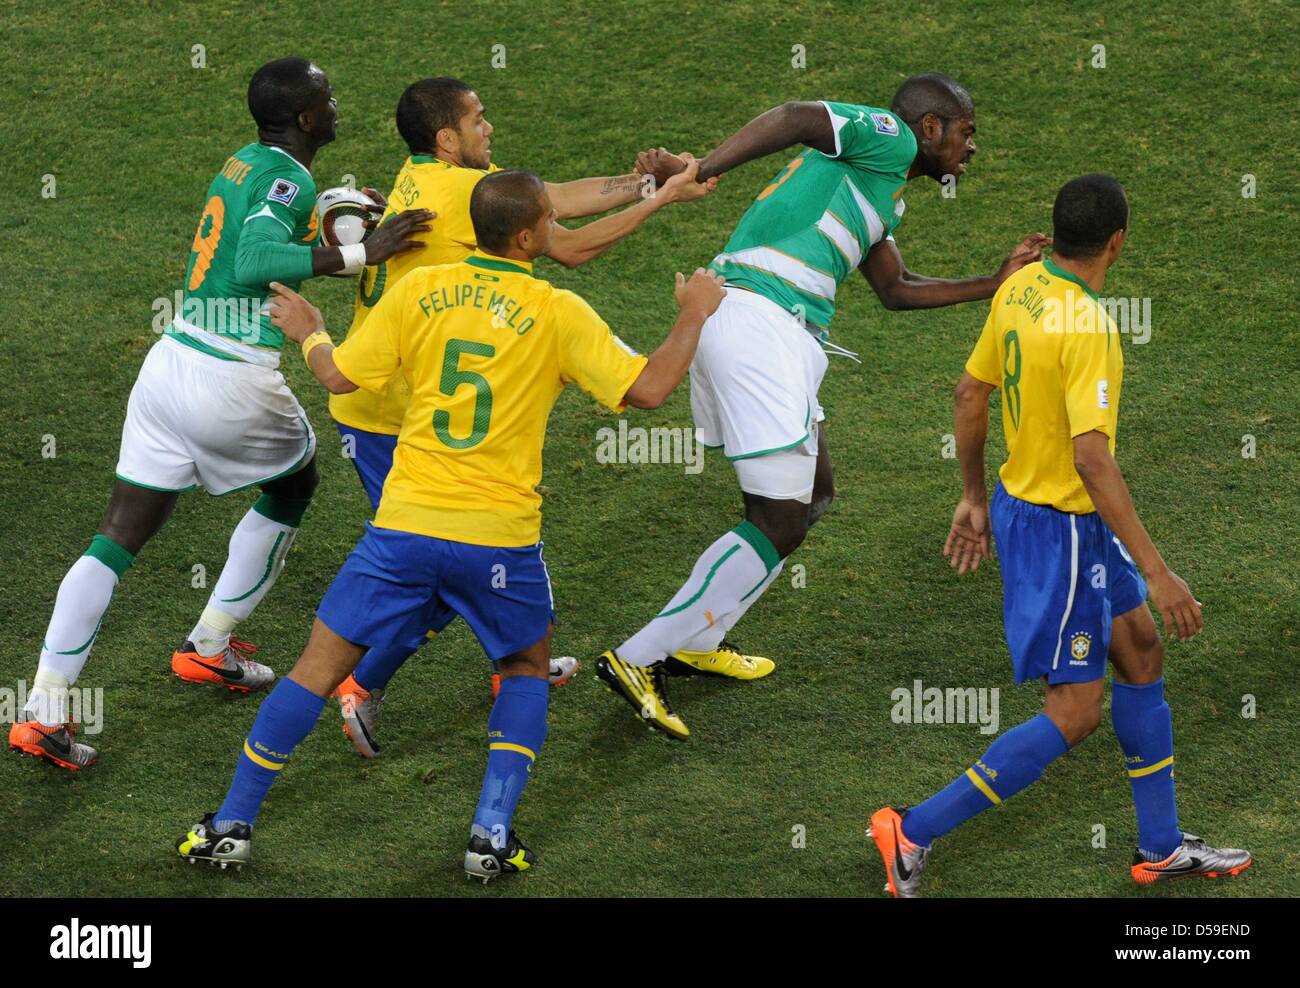 Brazil's Dani Alves (2nd L-R), Felipe Melo and Gilberto Silva scuffle with Ivory Coast's Ismael Tiote (L) and Romaric during the 2010 FIFA World Cup group G match between Brazil and Ivory Coast at Soccer City Stadium in Johannesburg, South Africa 20 June 2010. Photo: Marcus Brandt dpa - Please refer to http://dpaq.de/FIFA-WM2010-TC Stock Photo